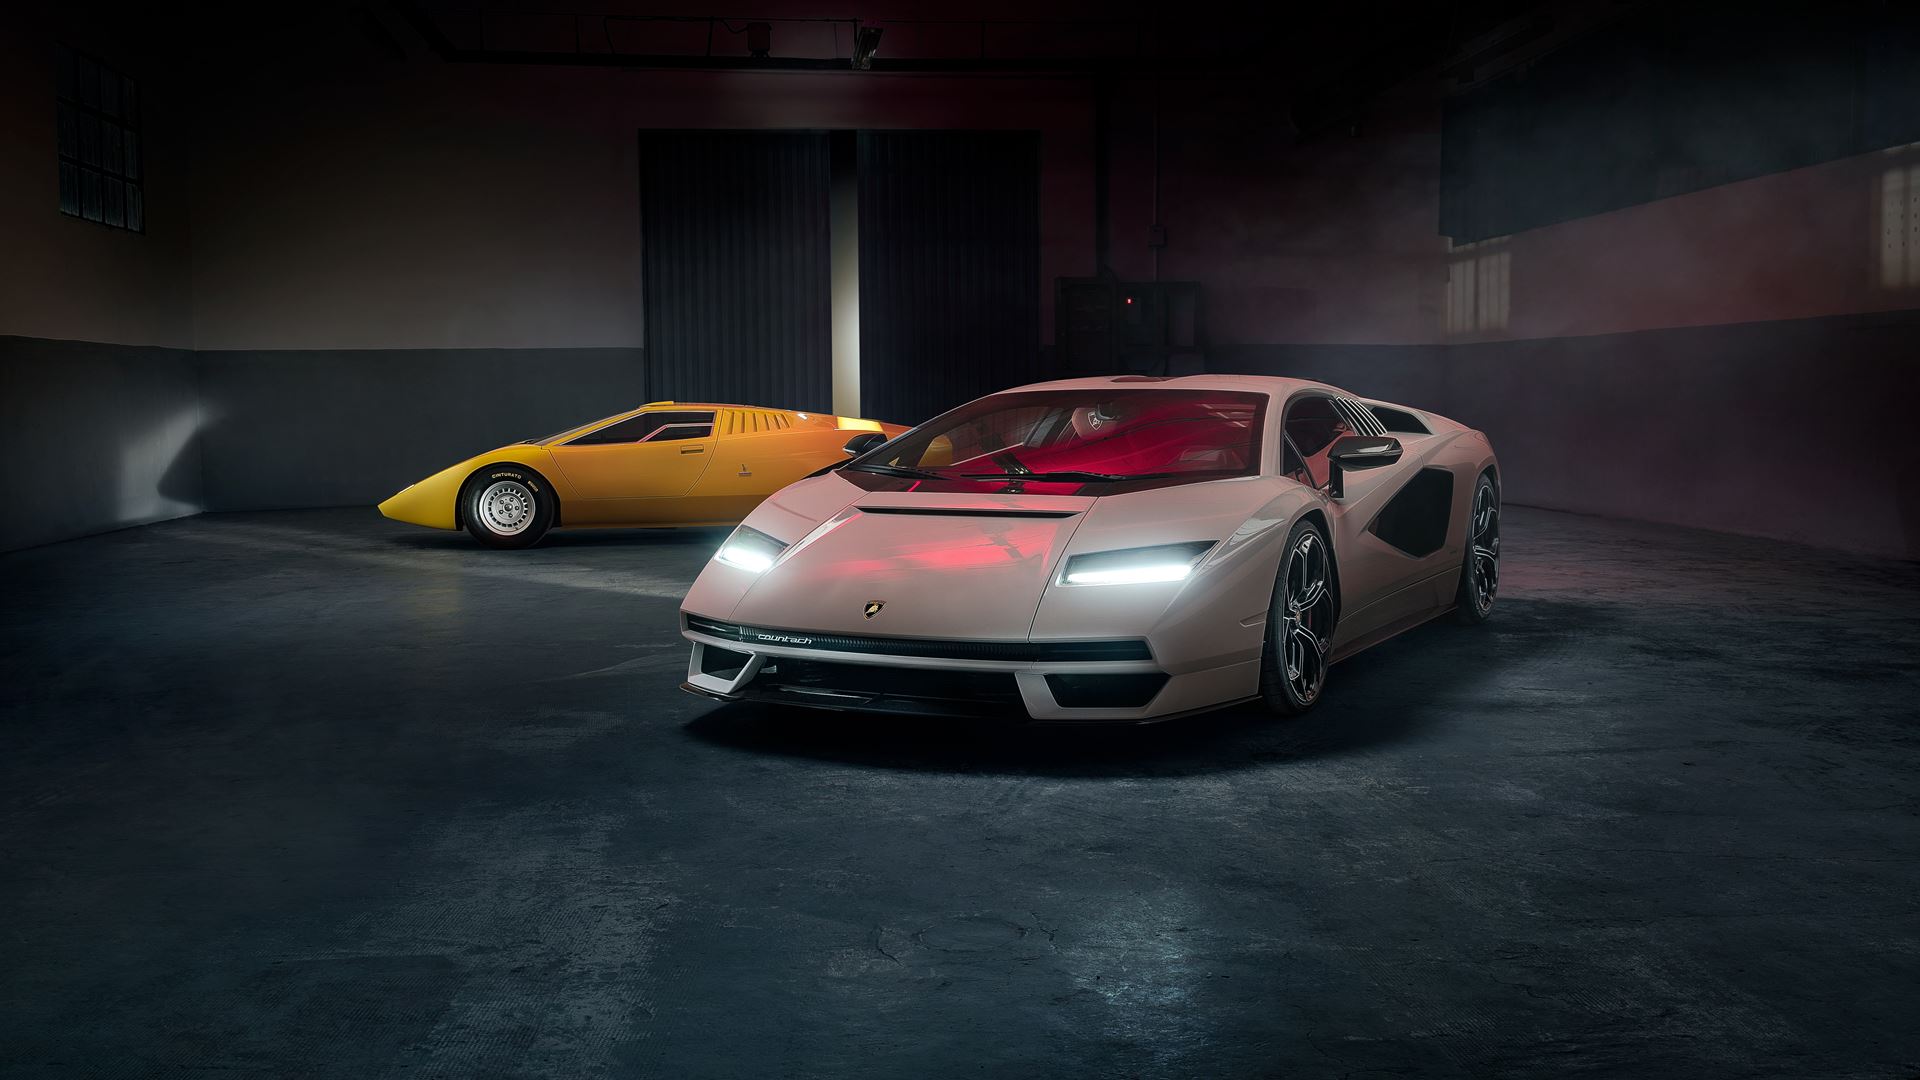 A record-breaking 2021 for Automobili Lamborghini - The company recorded its best year ever, with 8,405 cars delivered - Image 8